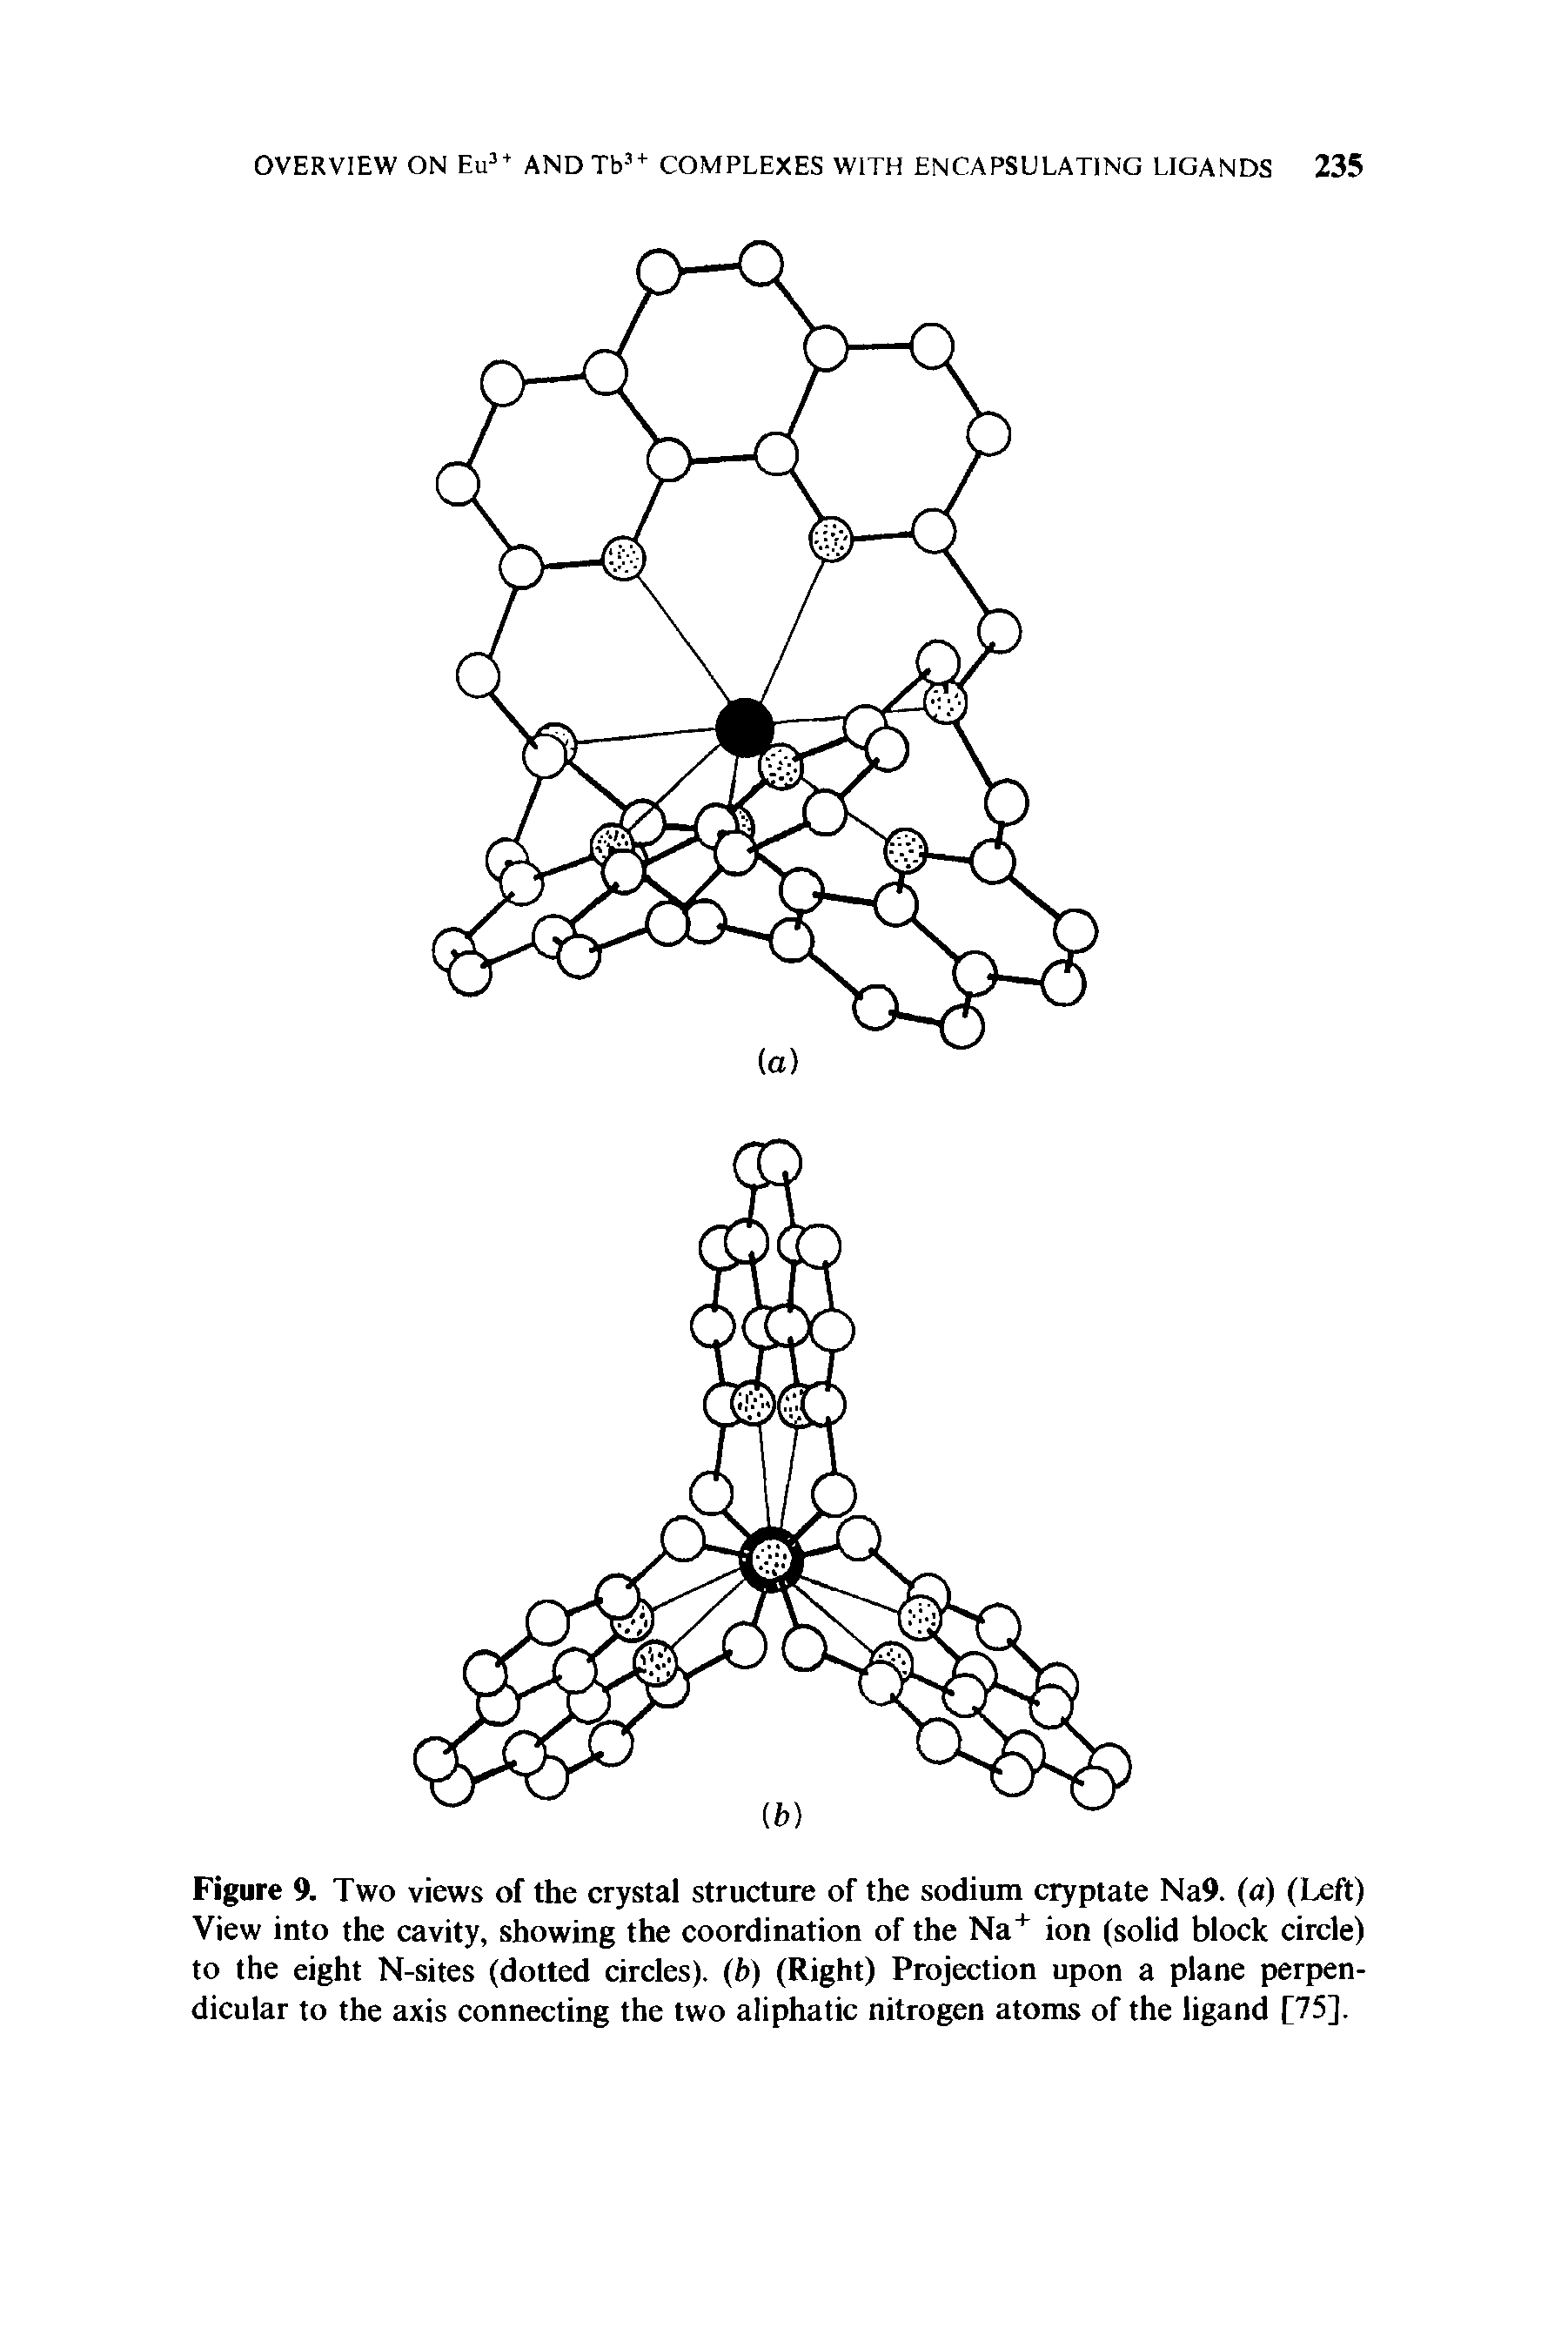 Figure 9. Two views of the crystal structure of the sodium cryptate Na9. (a) (Left) View into the cavity, showing the coordination of the Na+ ion (solid block circle) to the eight N-sites (dotted circles), (b) (Right) Projection upon a plane perpendicular to the axis connecting the two aliphatic nitrogen atoms of the ligand [75].